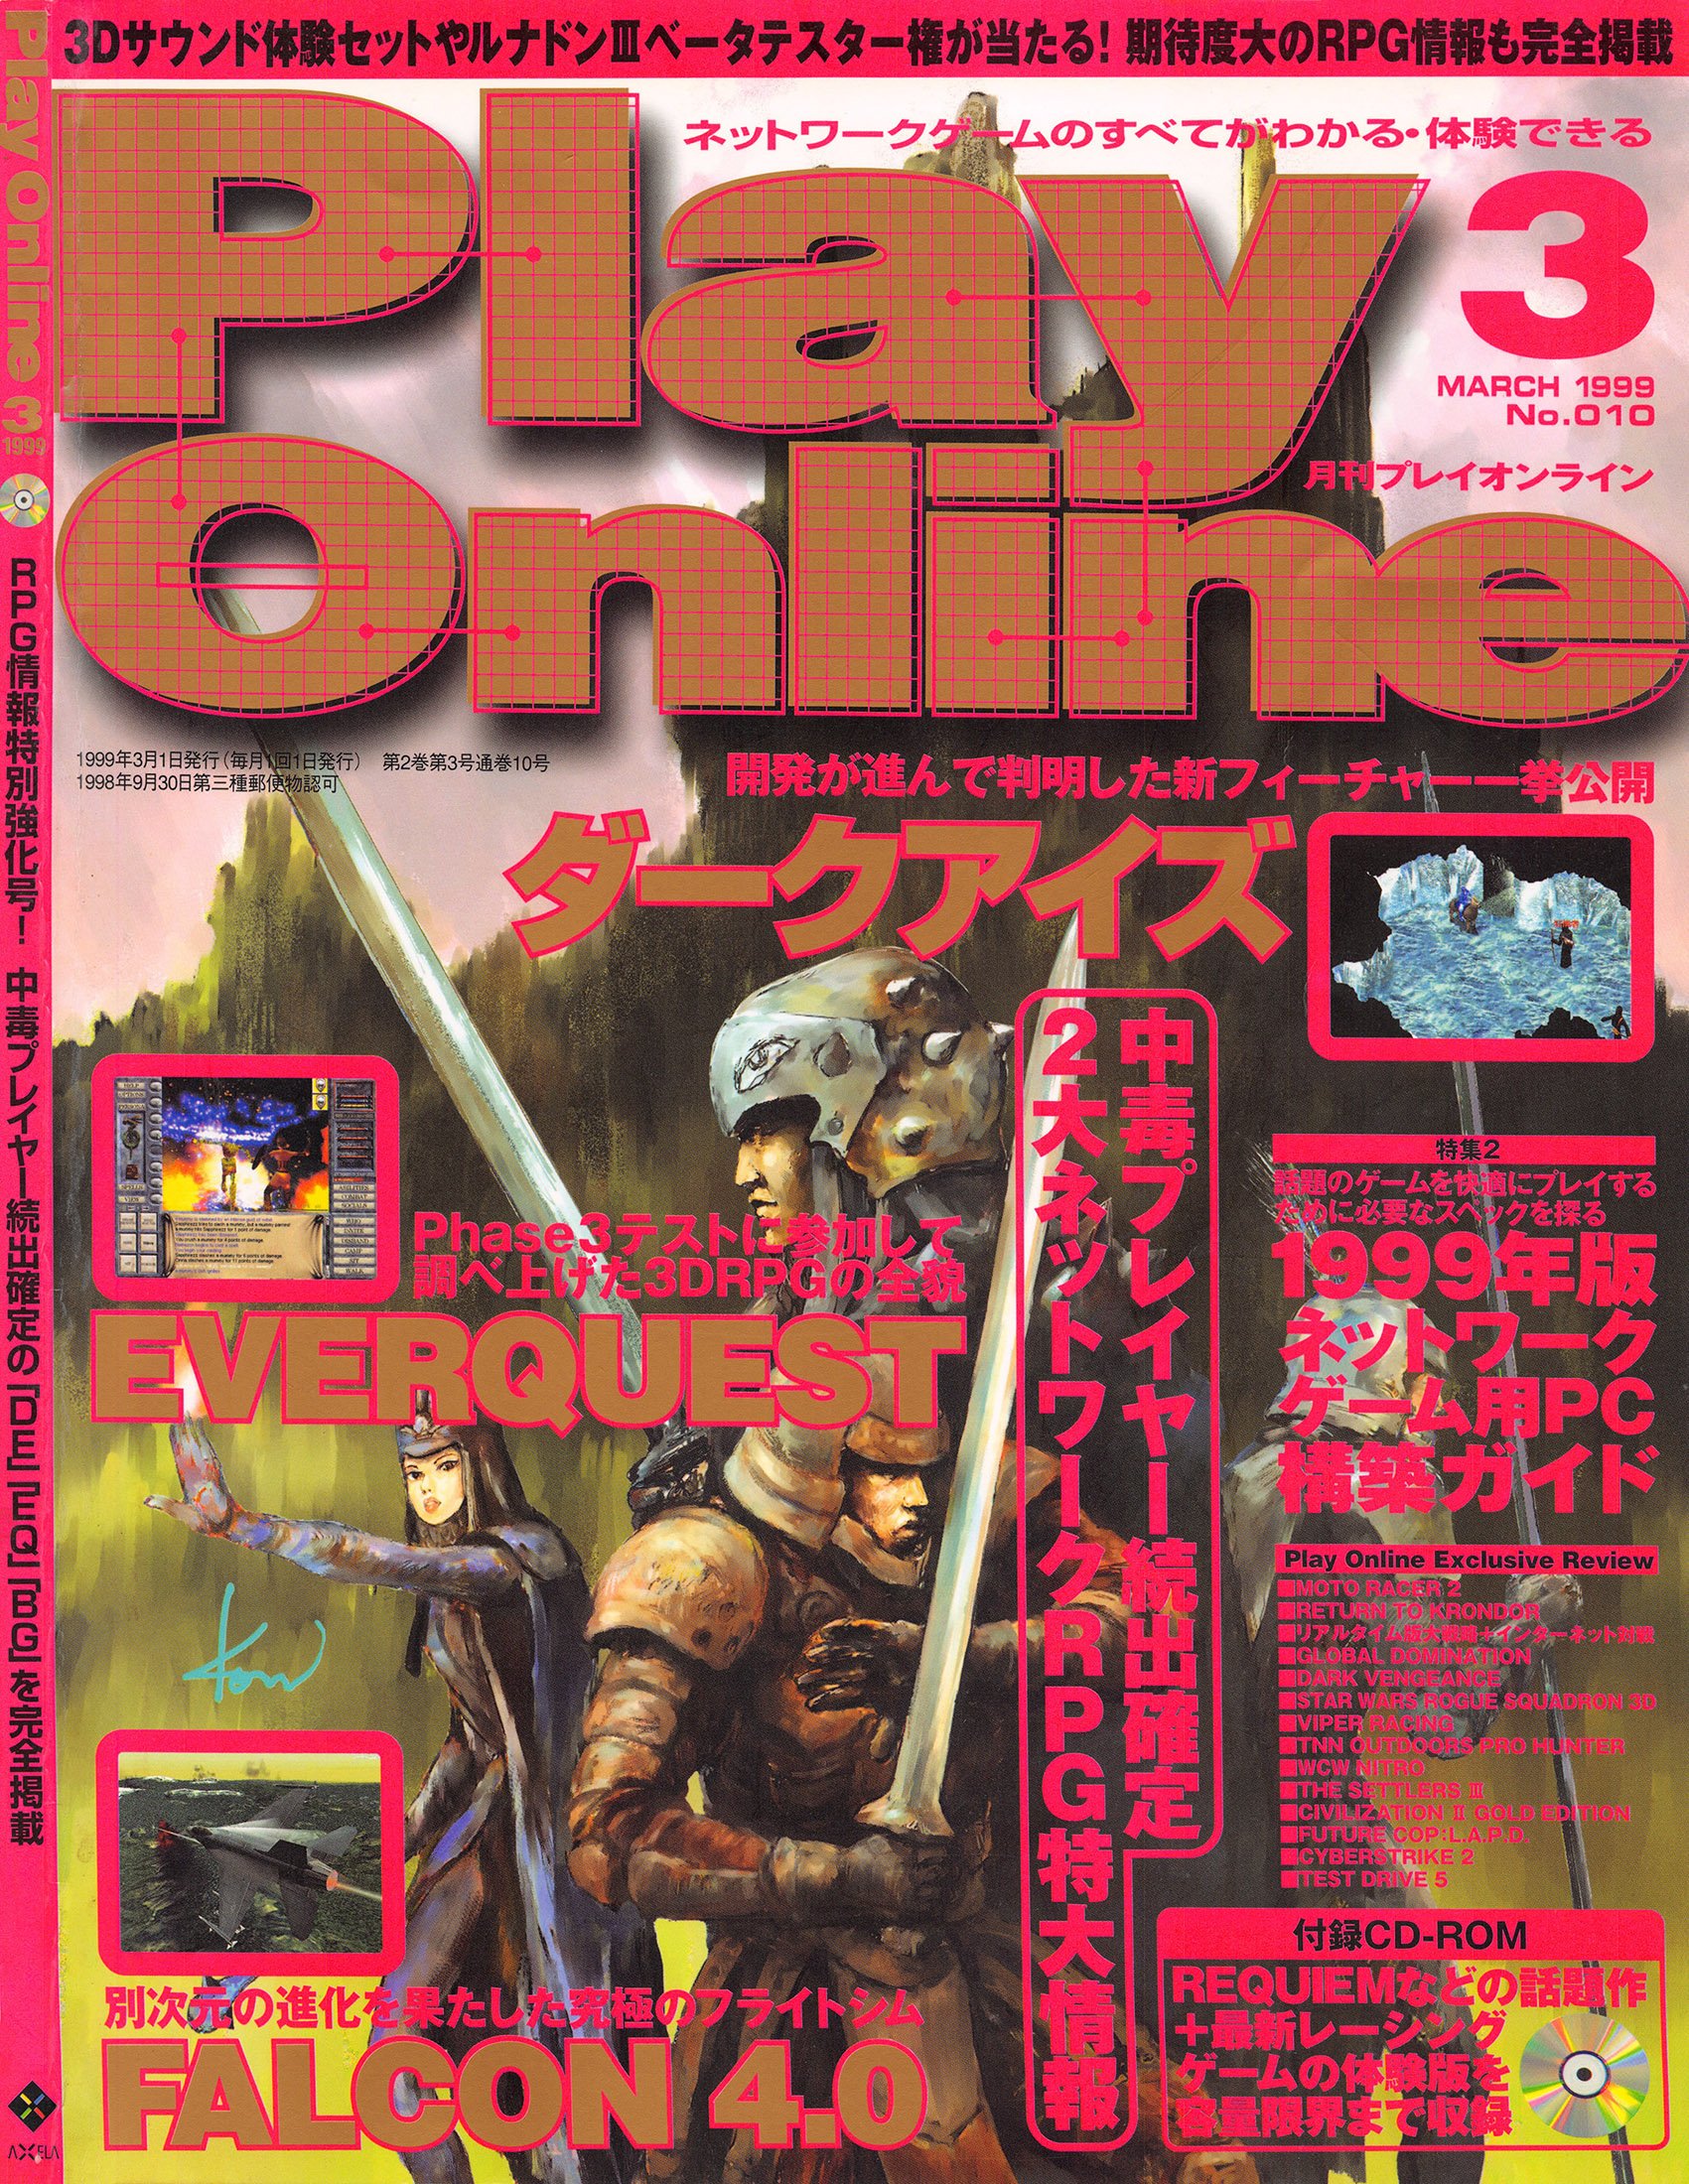 Play Online No.010 (March 1999)